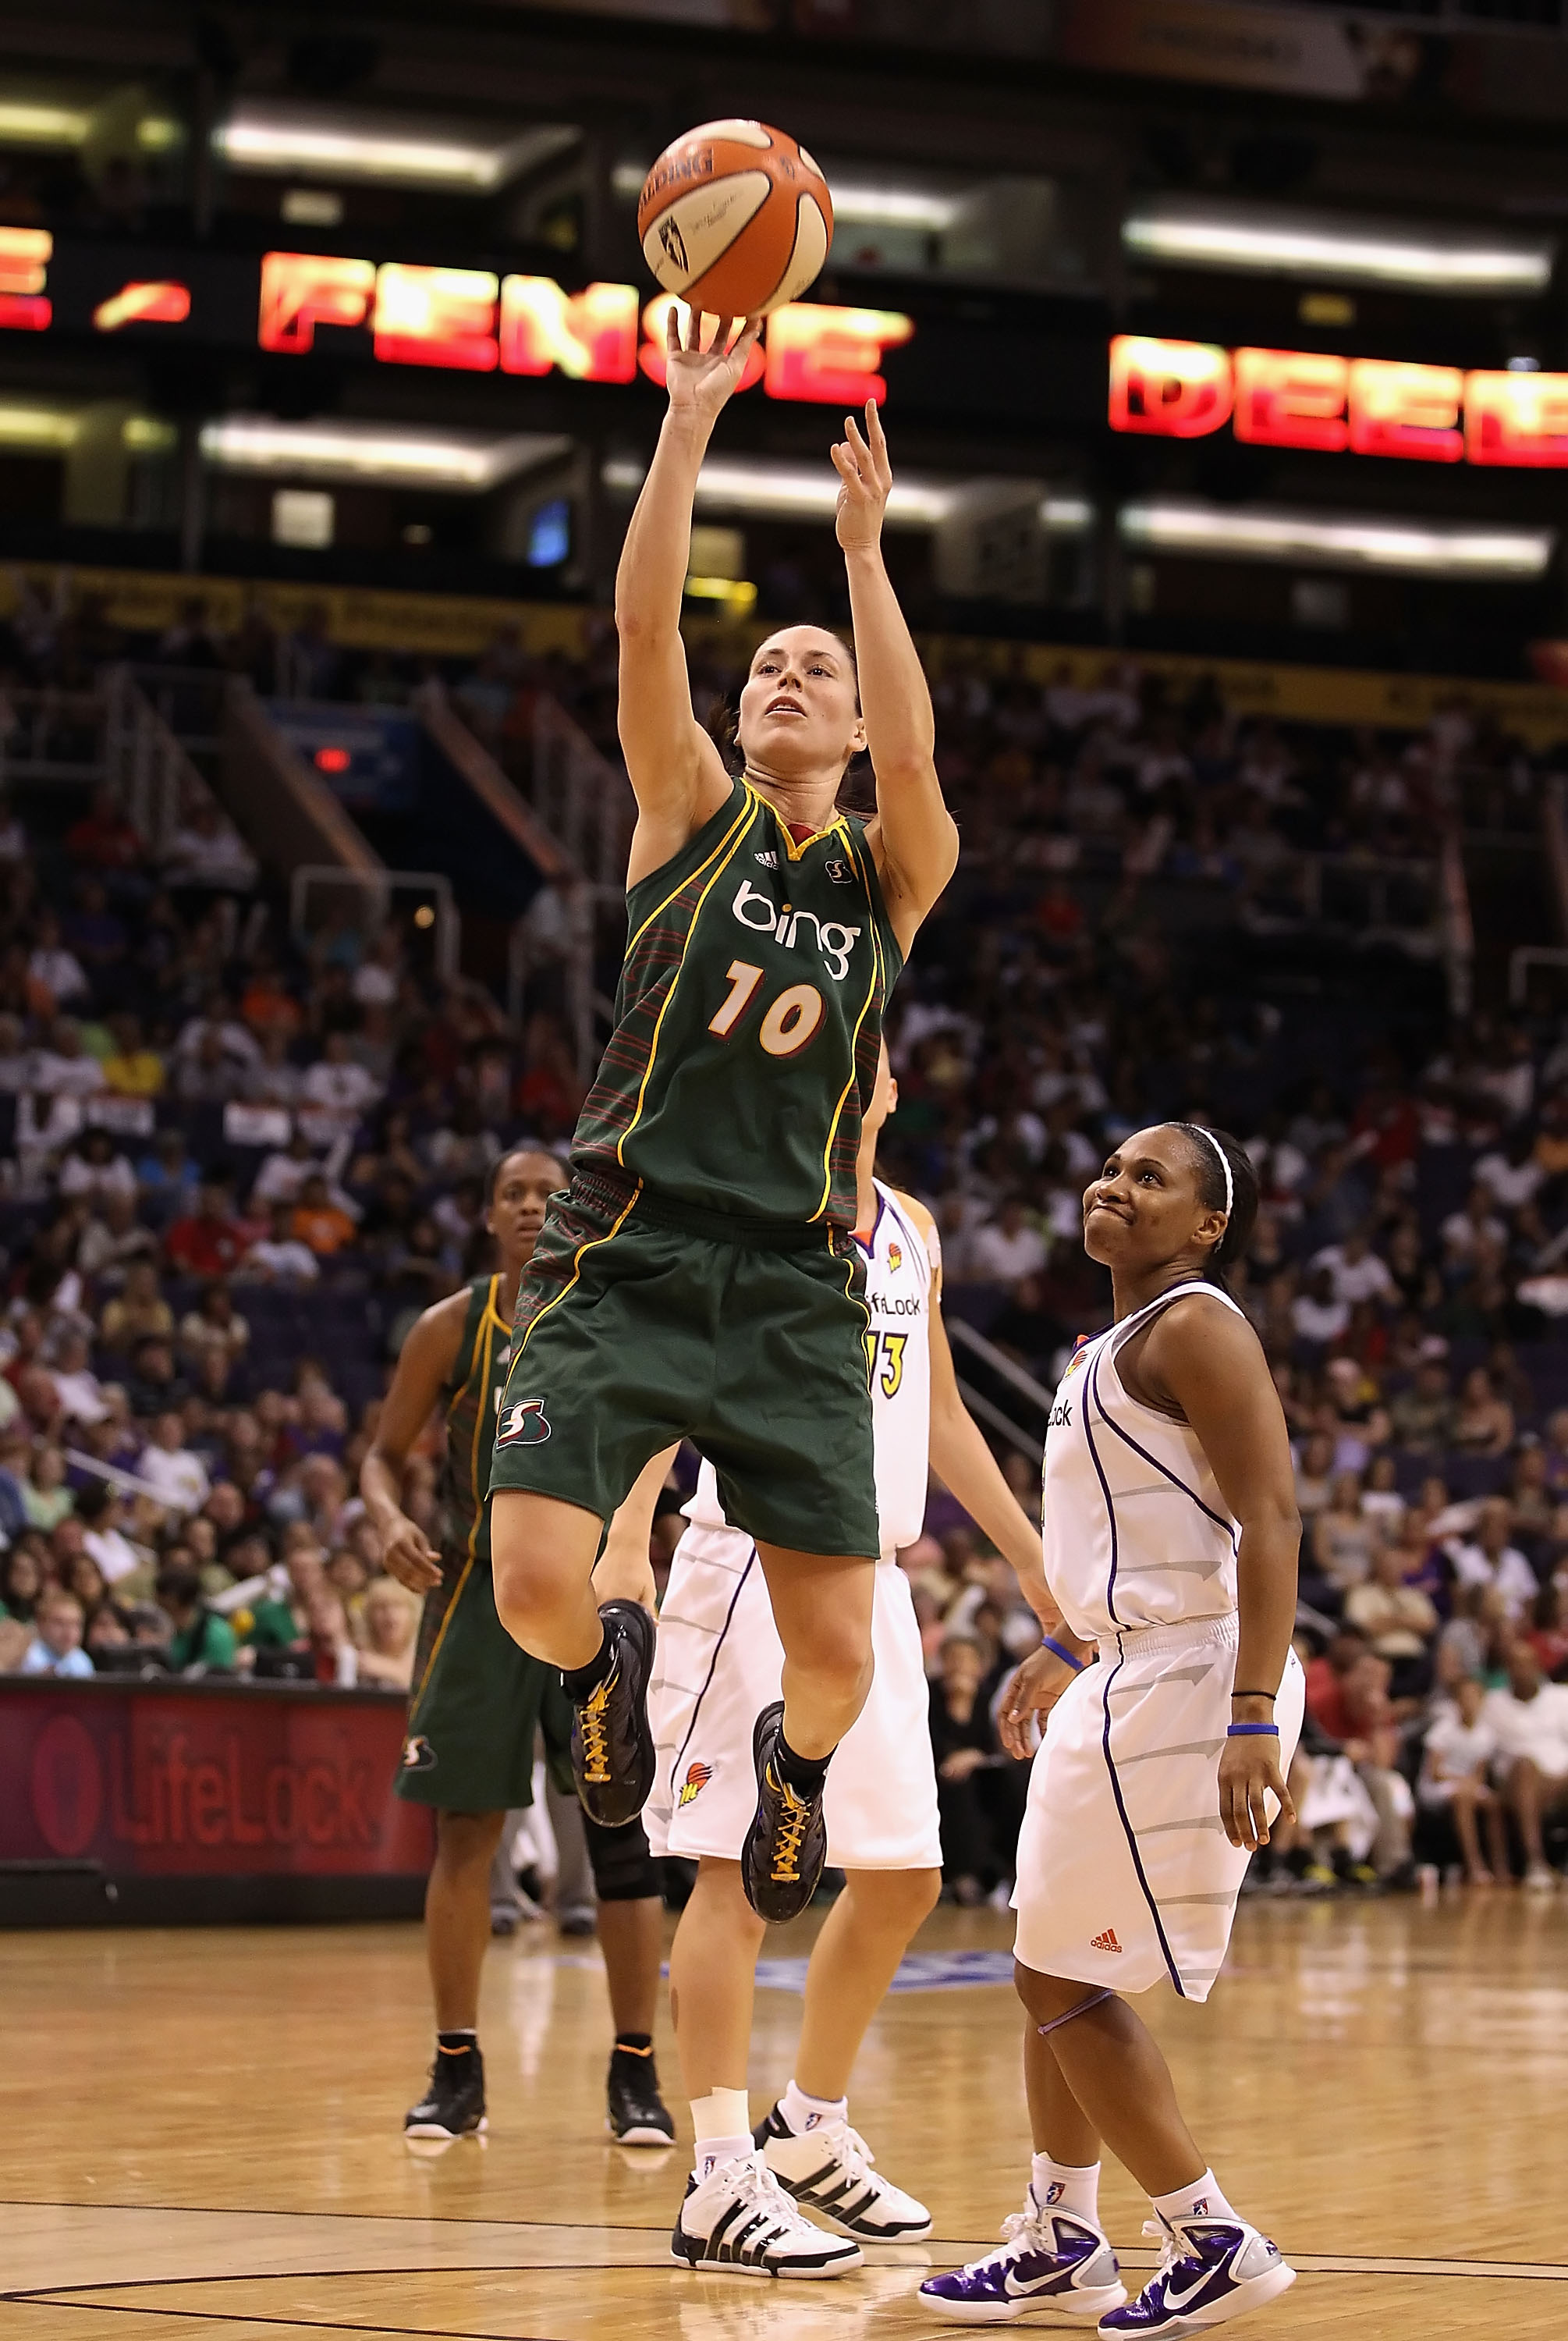 PHOENIX - SEPTEMBER 05:  Sue Bird #10 of the Seattle Storm puts up a shot against the Phoenix Mercury in Game Two of the Western Conference Finals during the 2010 WNBA Playoffs at US Airways Center on September 5, 2010 in Phoenix, Arizona.  NOTE TO USER: